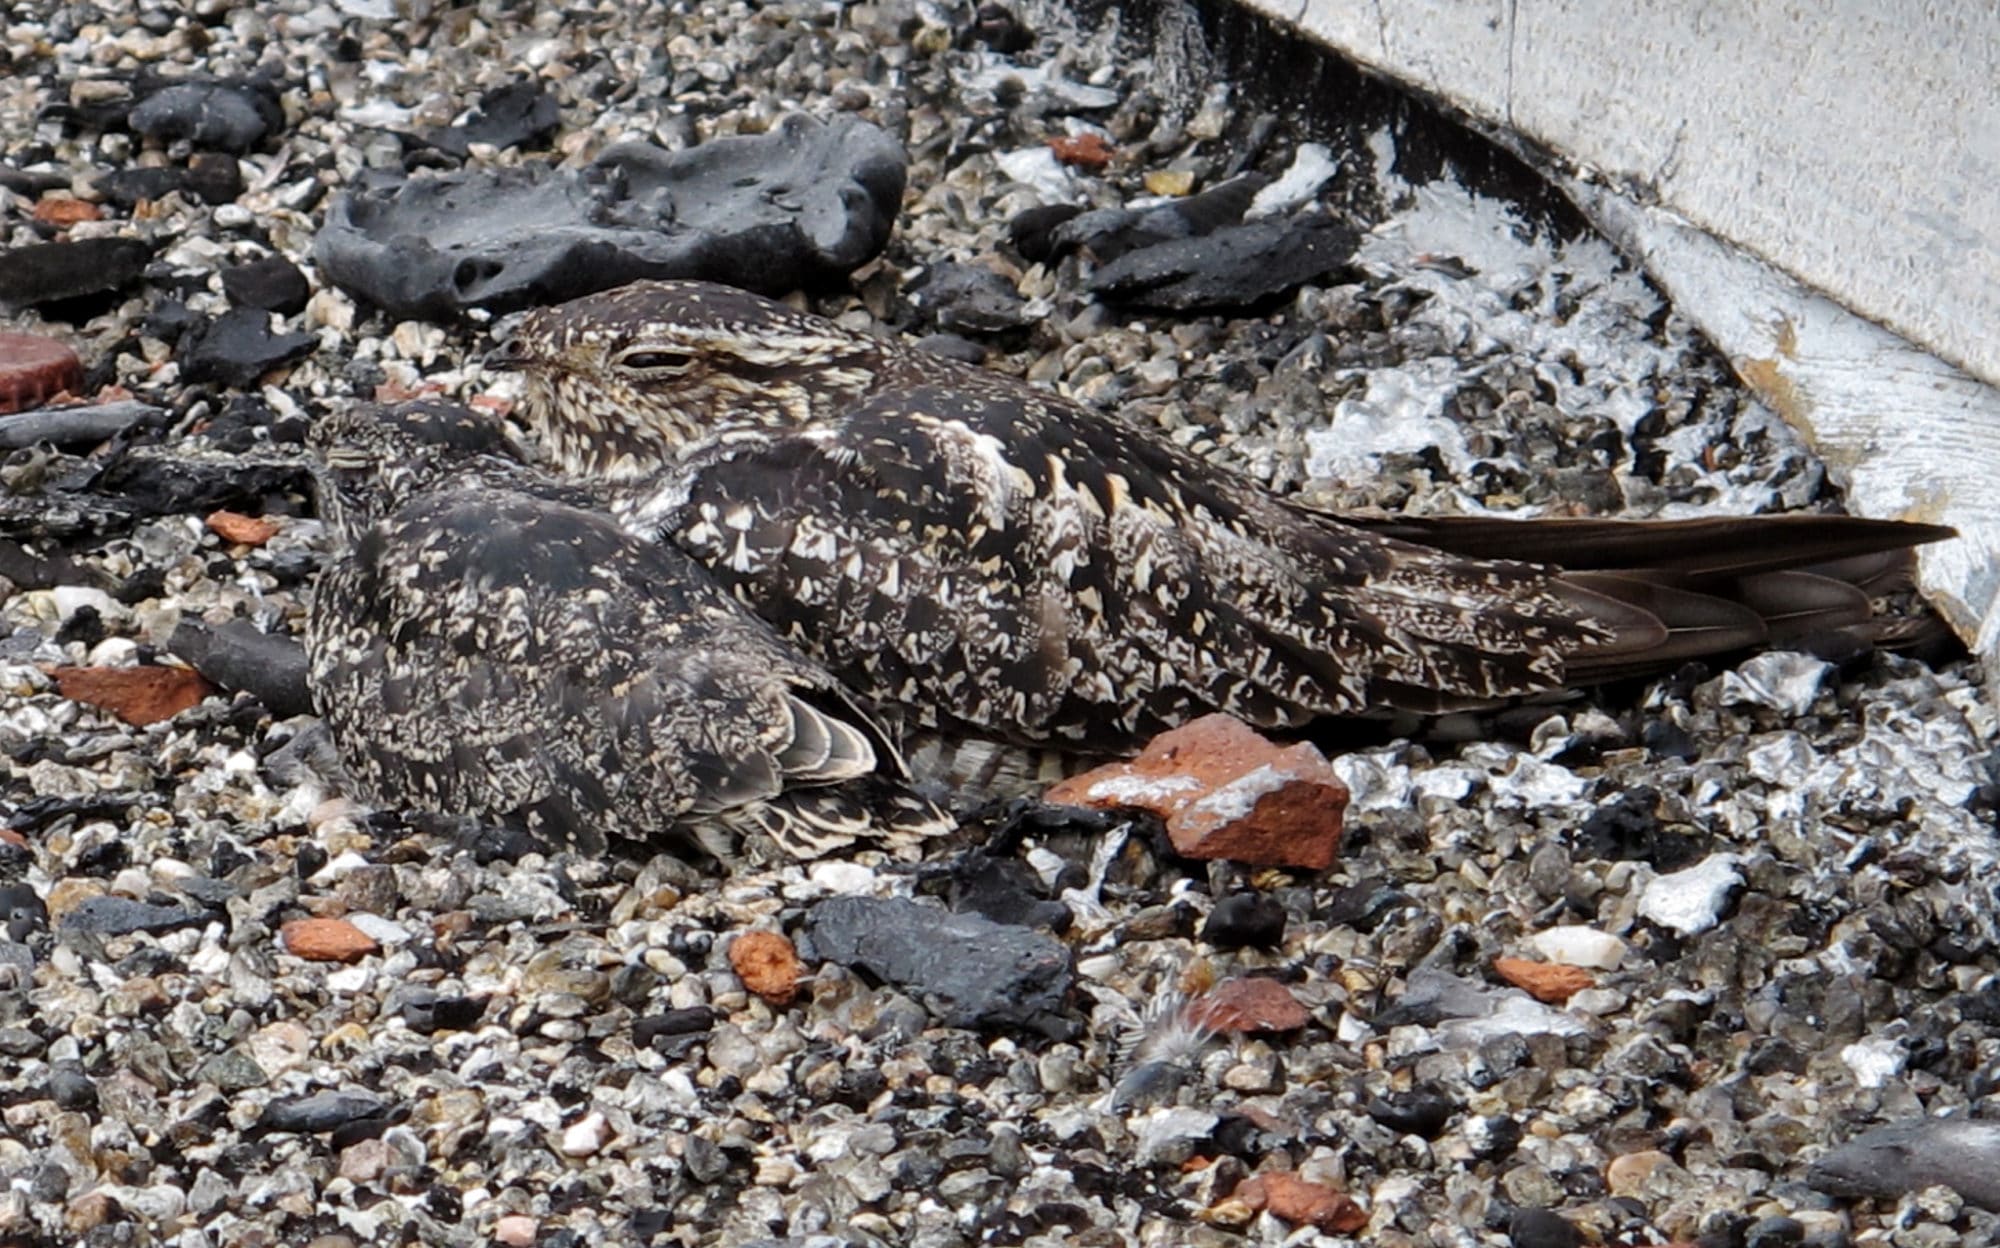 A nighthawk mother and its chick on a rooftop in downtown Keene. (photo © Brett Amy Thelen)